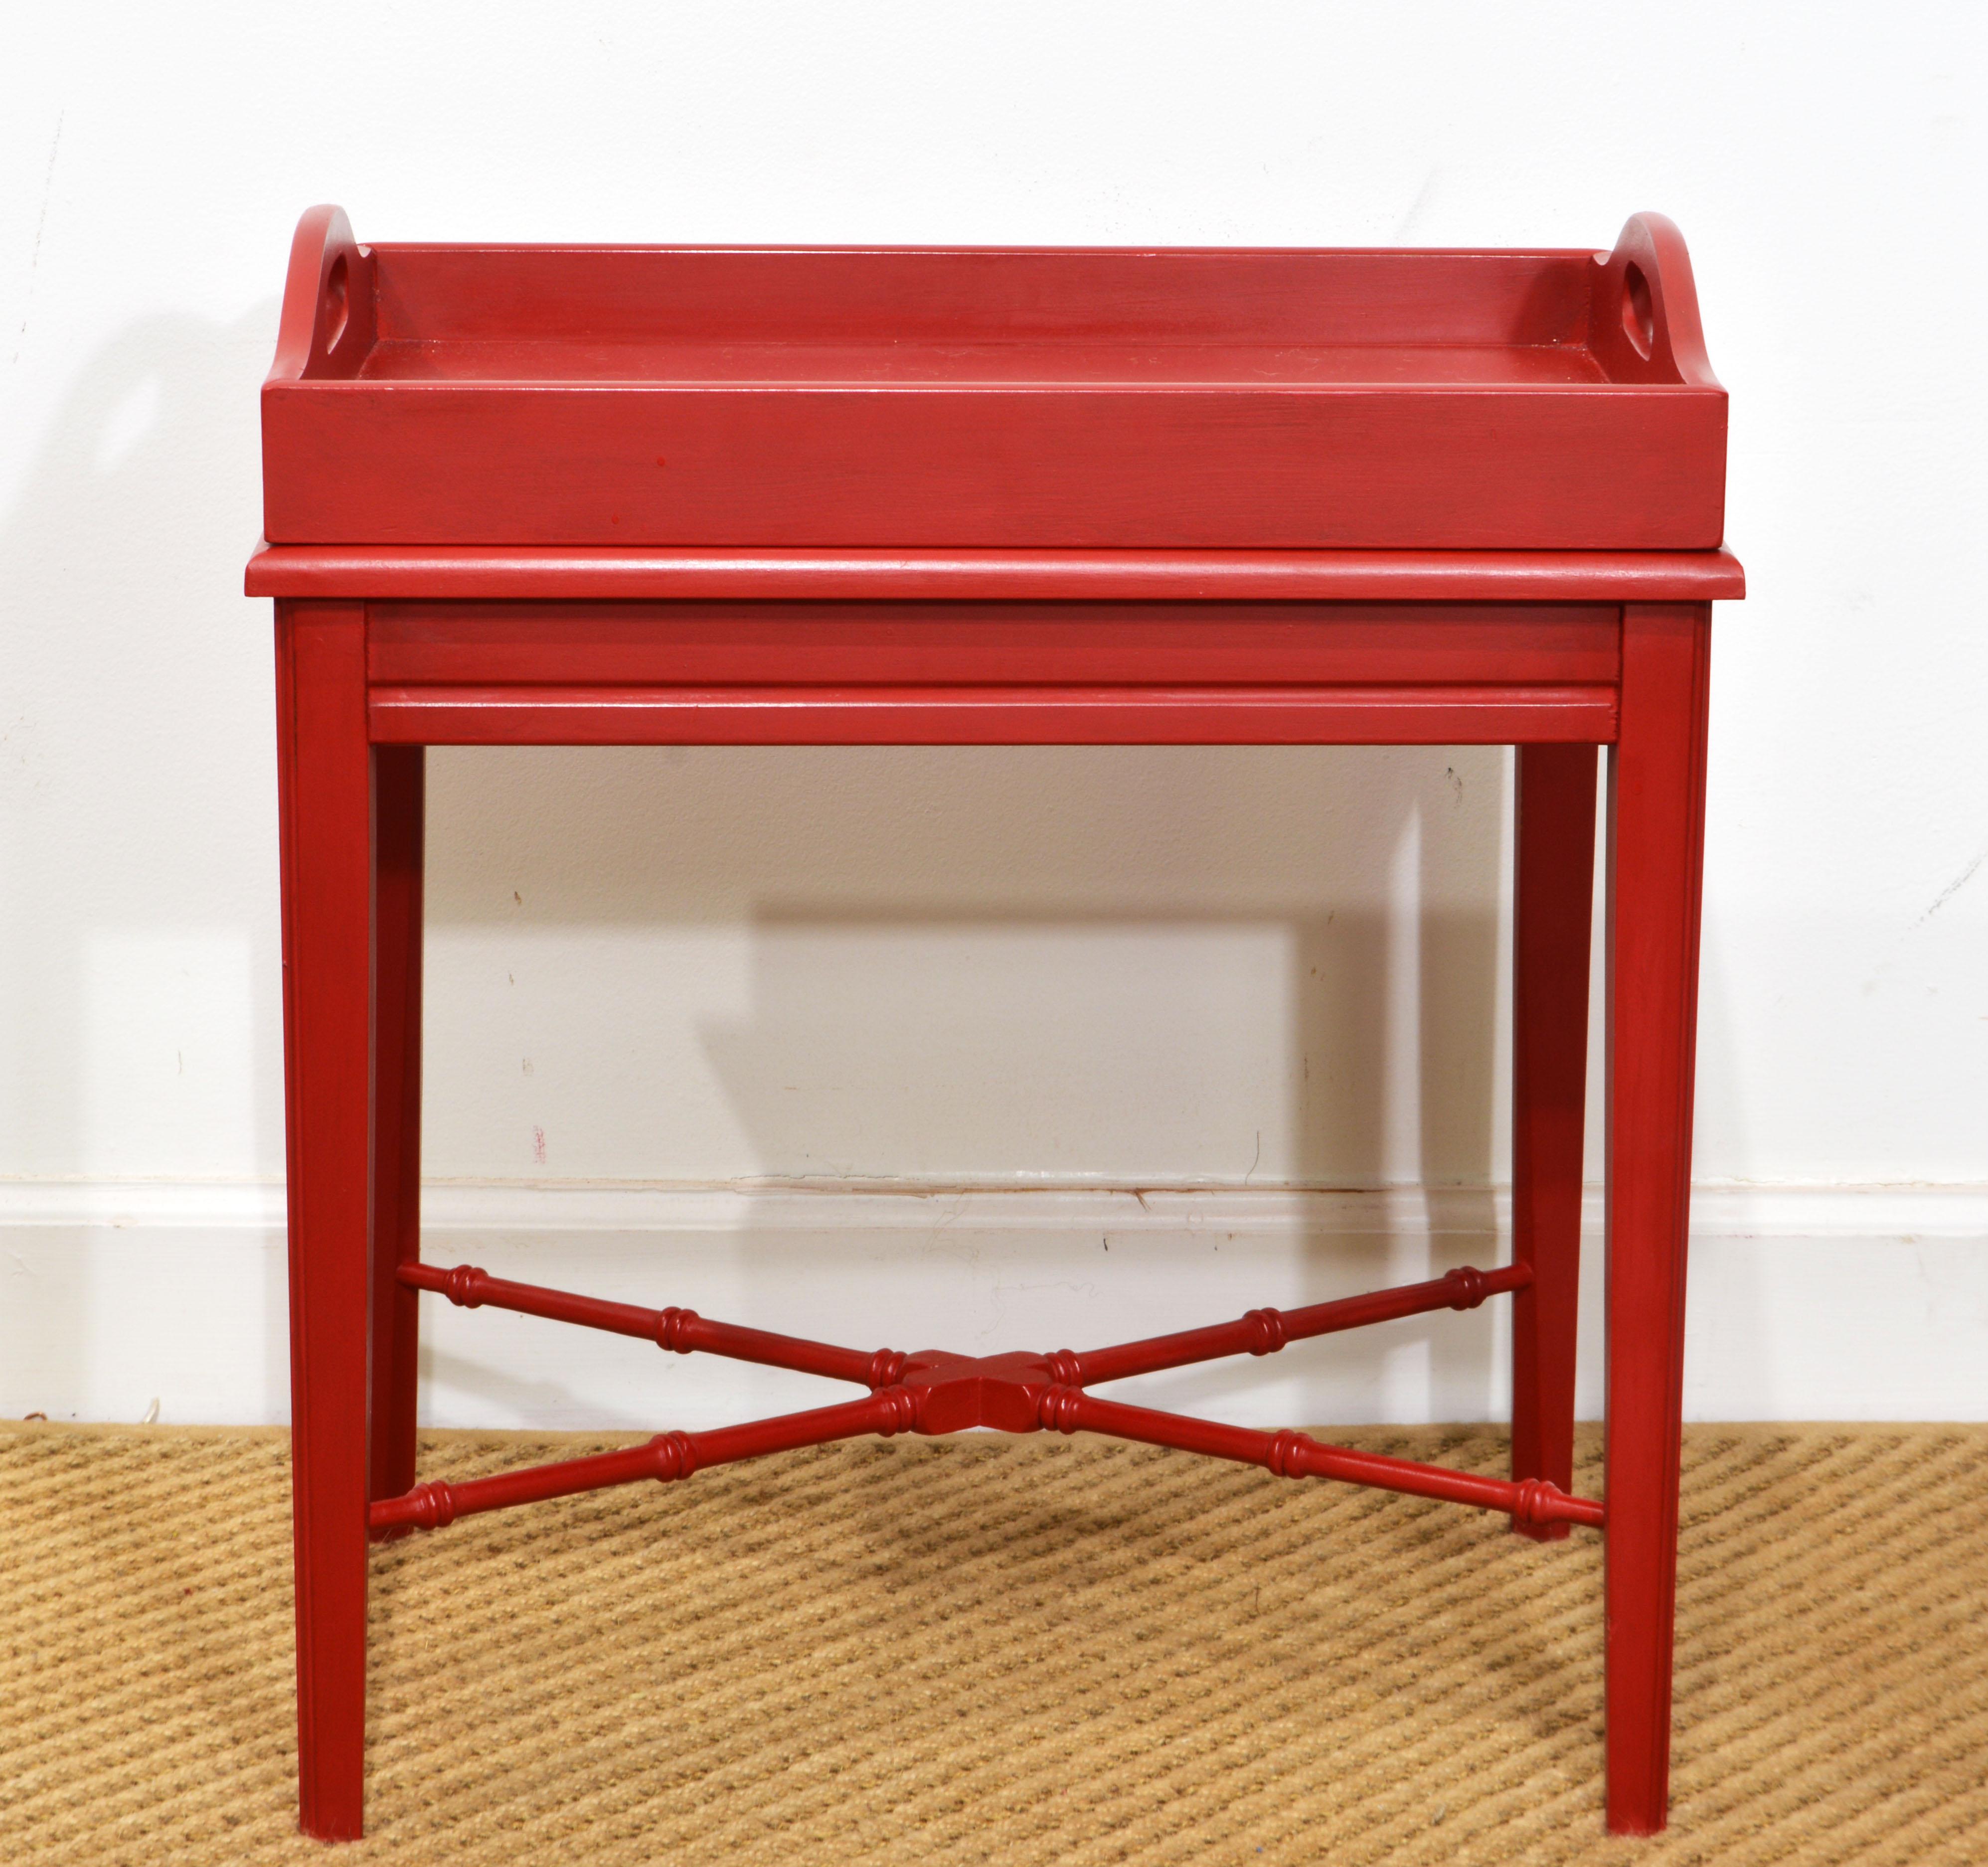 This attractive vintage Butler's lift off tray table features a tray that lifts off by two cut out shaped handles. The design of the base top makes it easy to place the tray precisely. The table base is designed in the Regency tradition with elegant